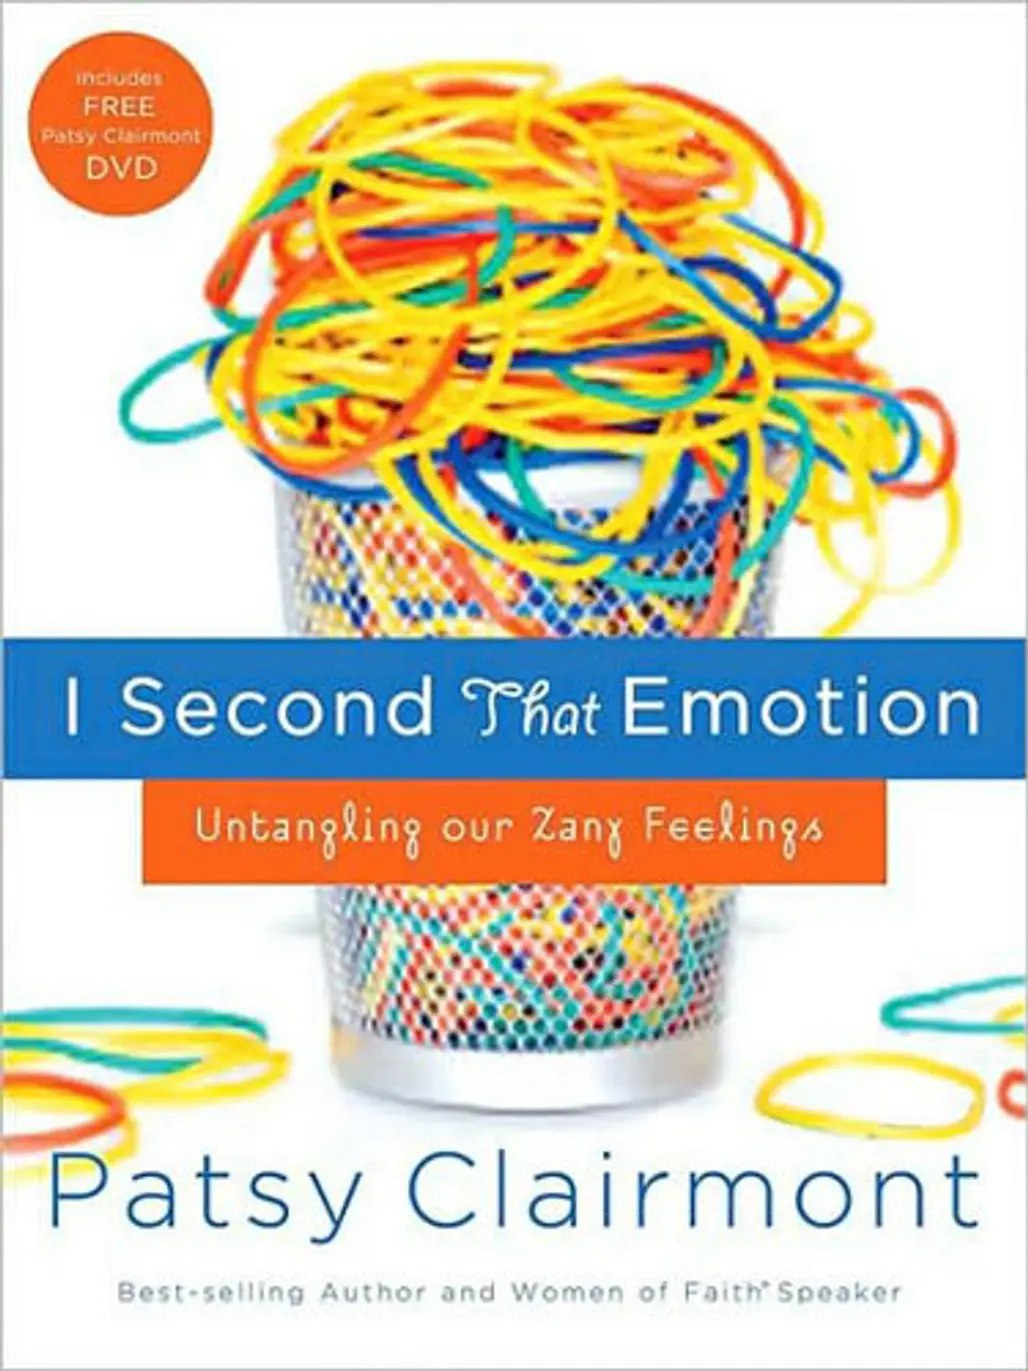 “I Second That Emotion: Untangling Our Zany Feeling” by Patsy Clairmont